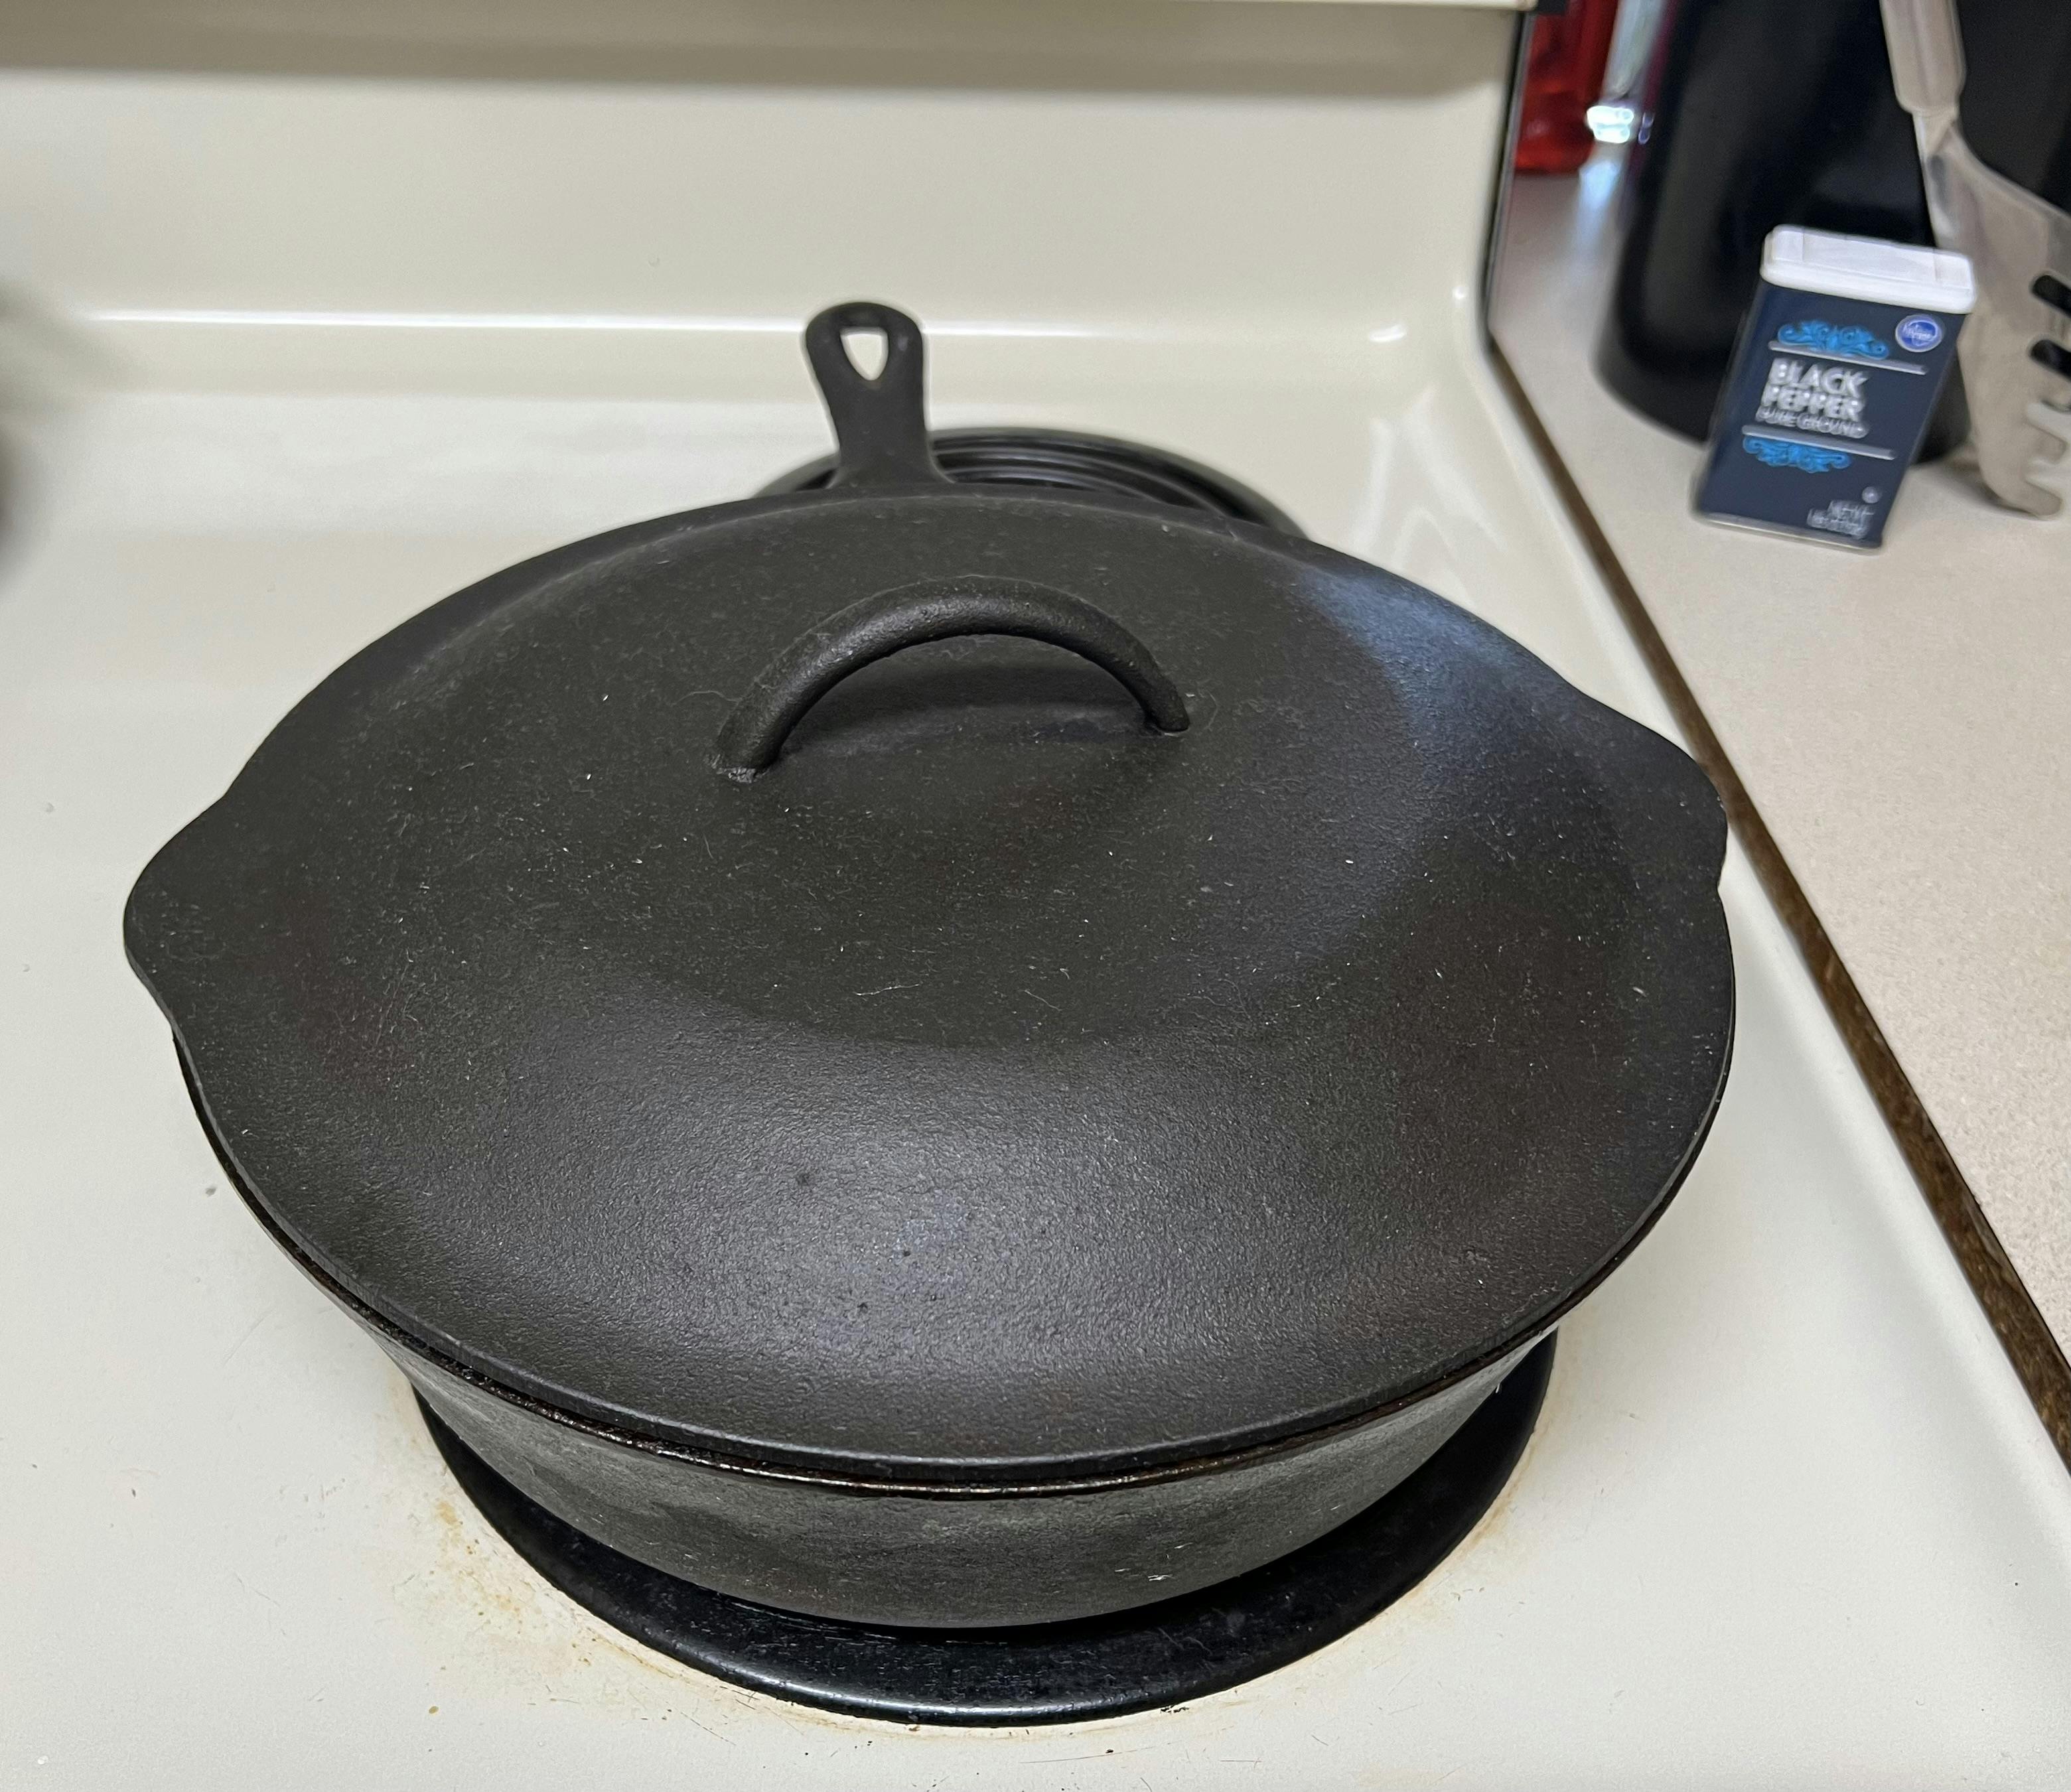 My daughter got me a 4 inch cast iron skillet from the thrift